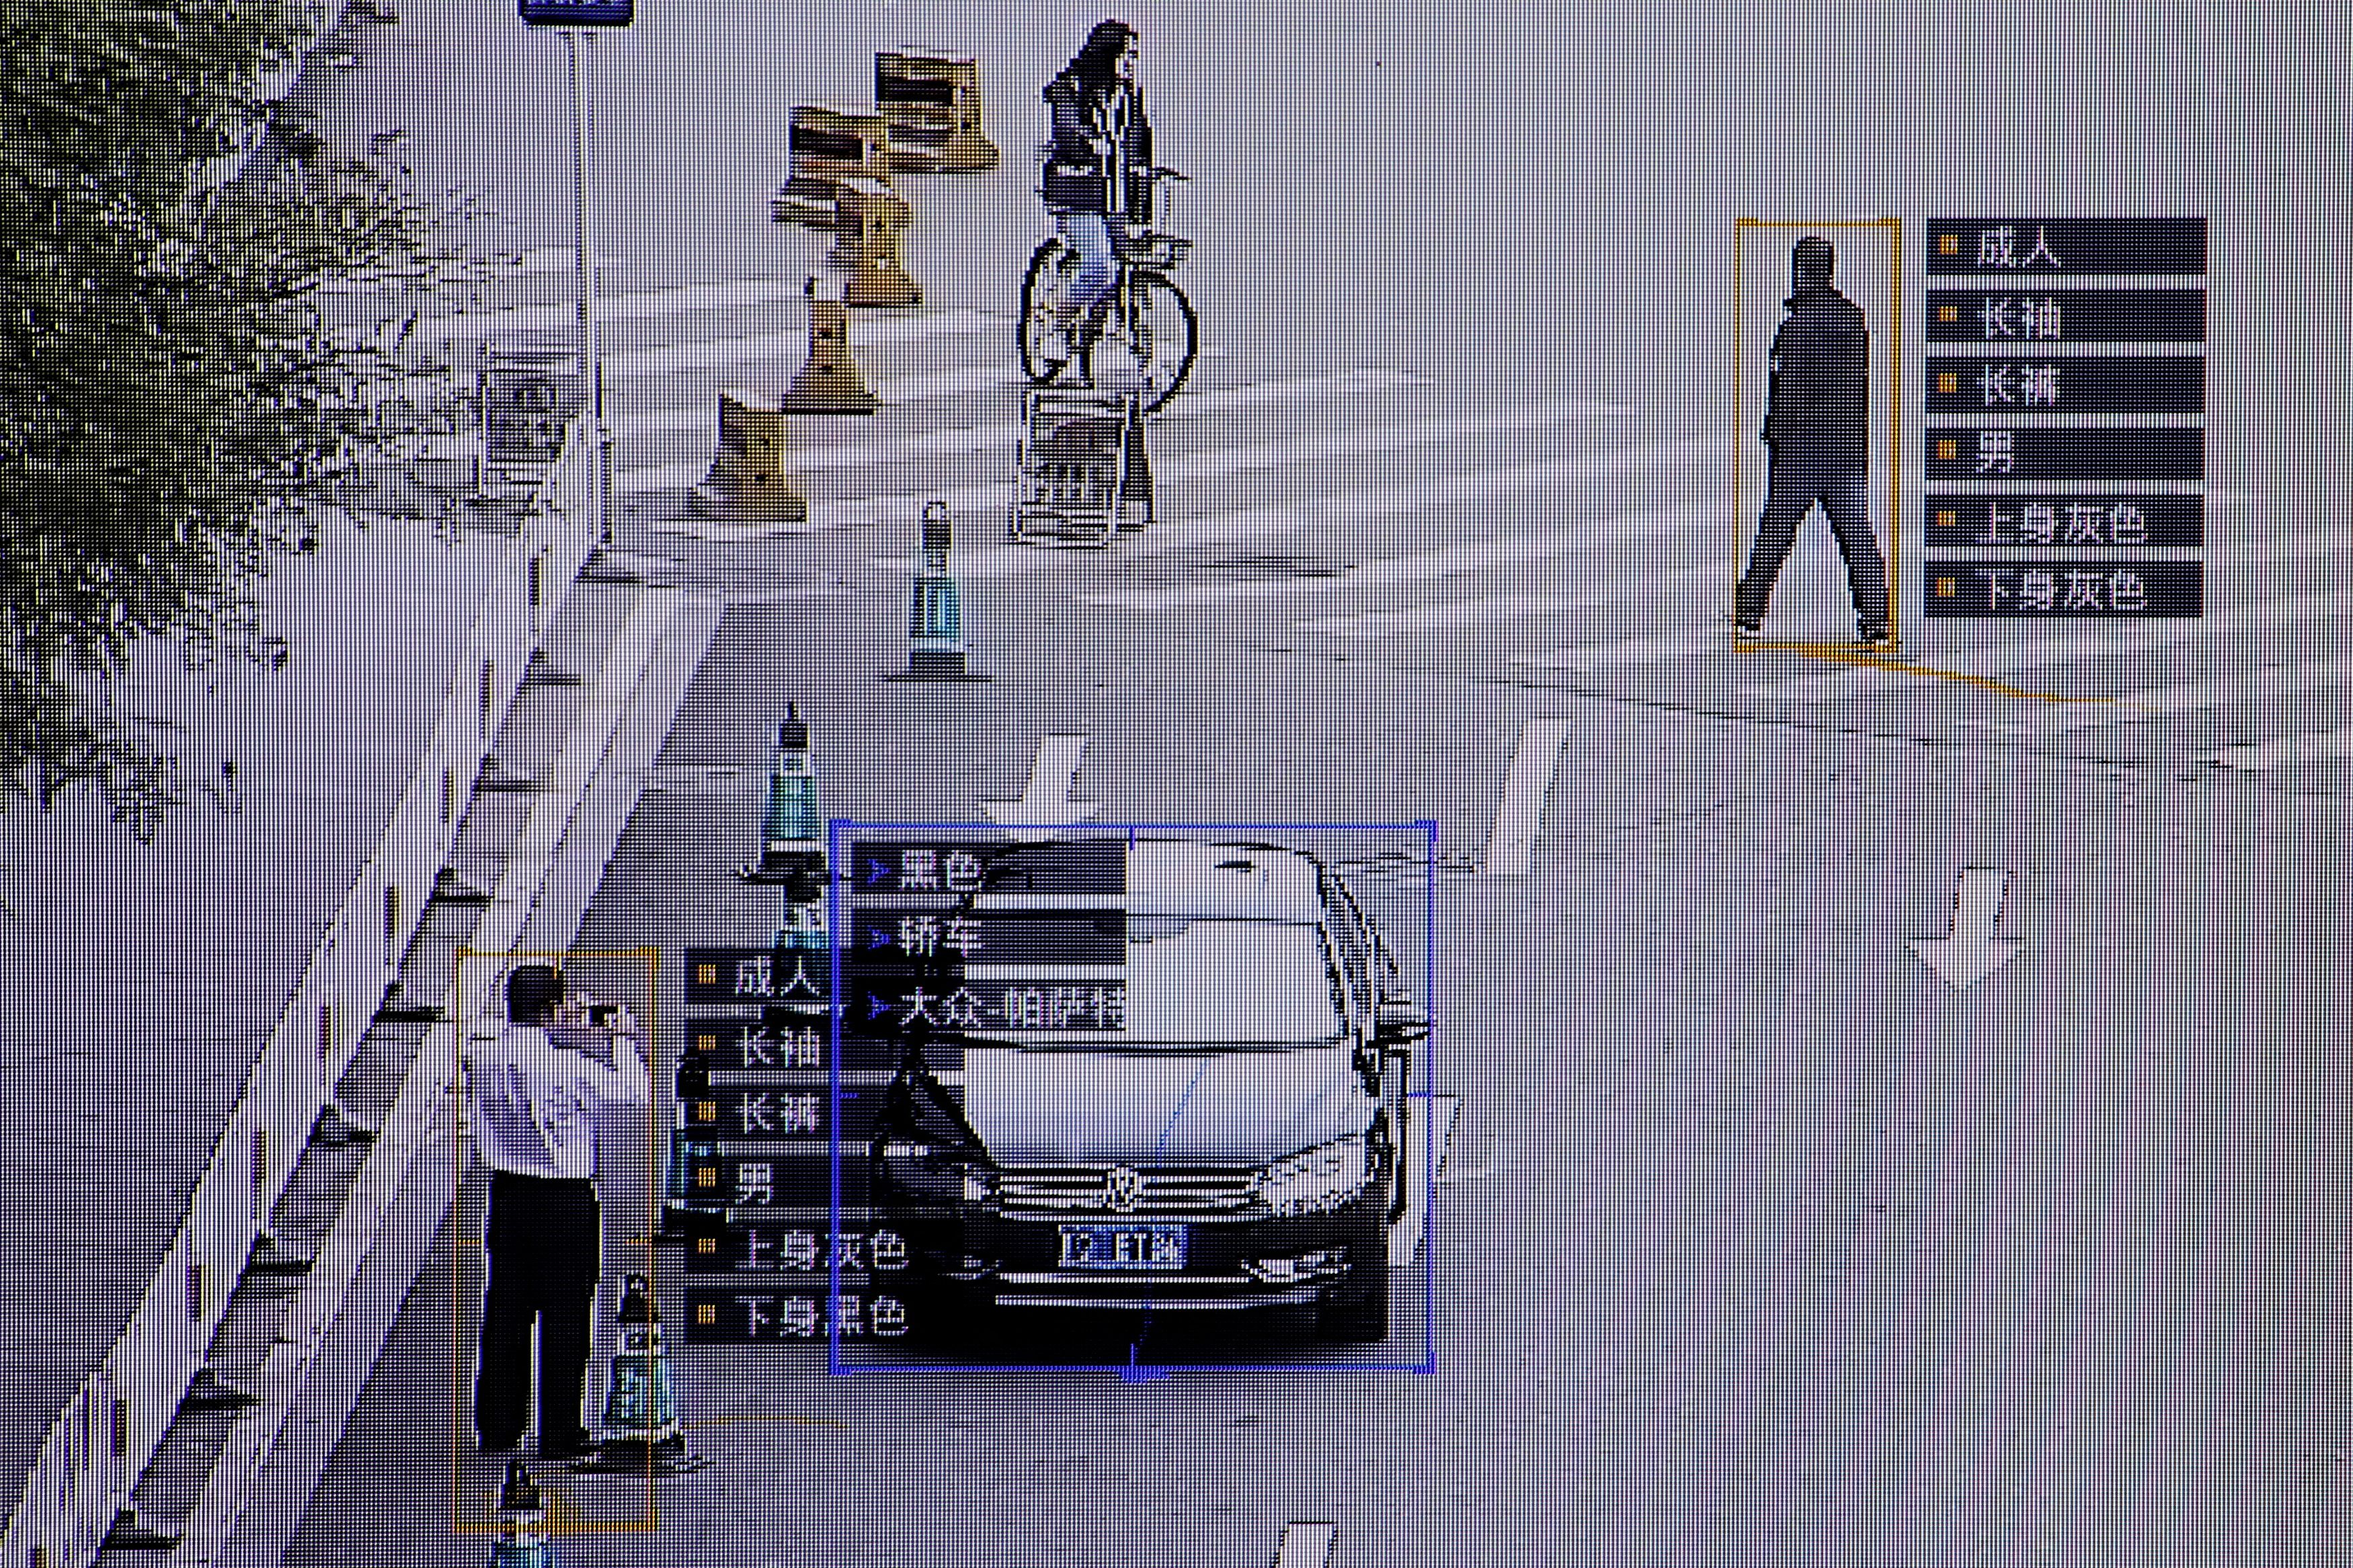 SenseTime surveillance software, which identifies details about people and vehicles, runs during a demonstration at the company's office in Beijing